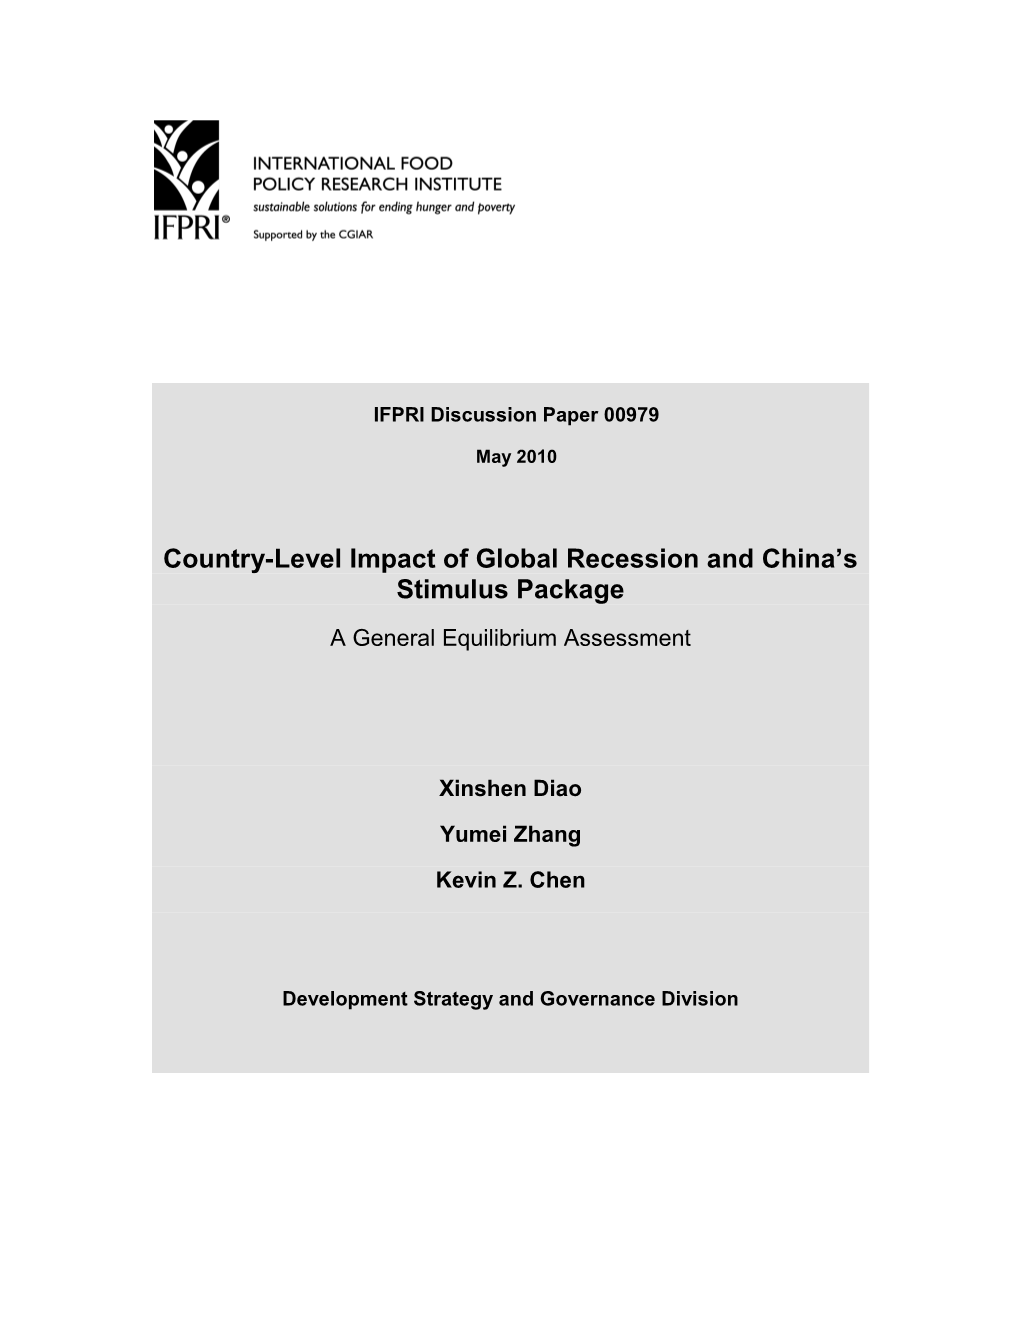 Country-Level Impact of Global Recession and China's Stimulus